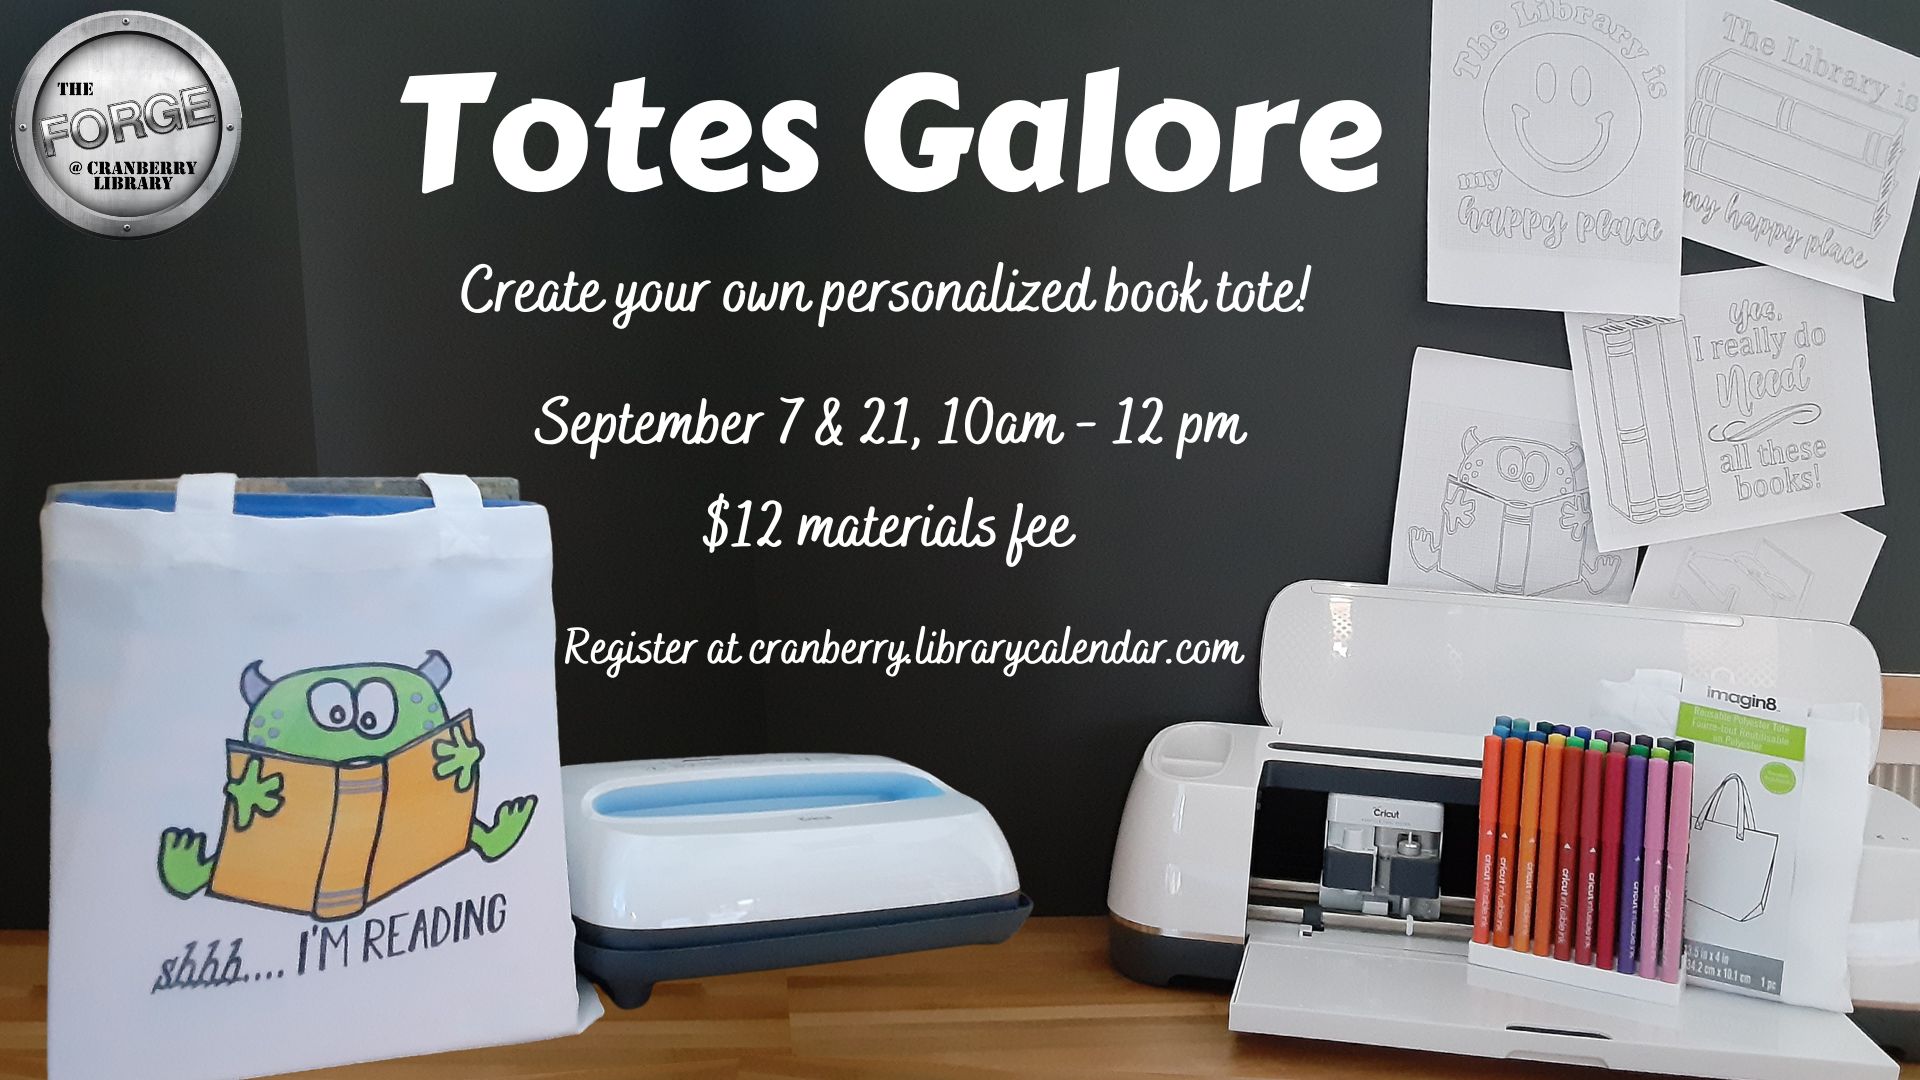 Flyer for Totes Galore program in The Forge